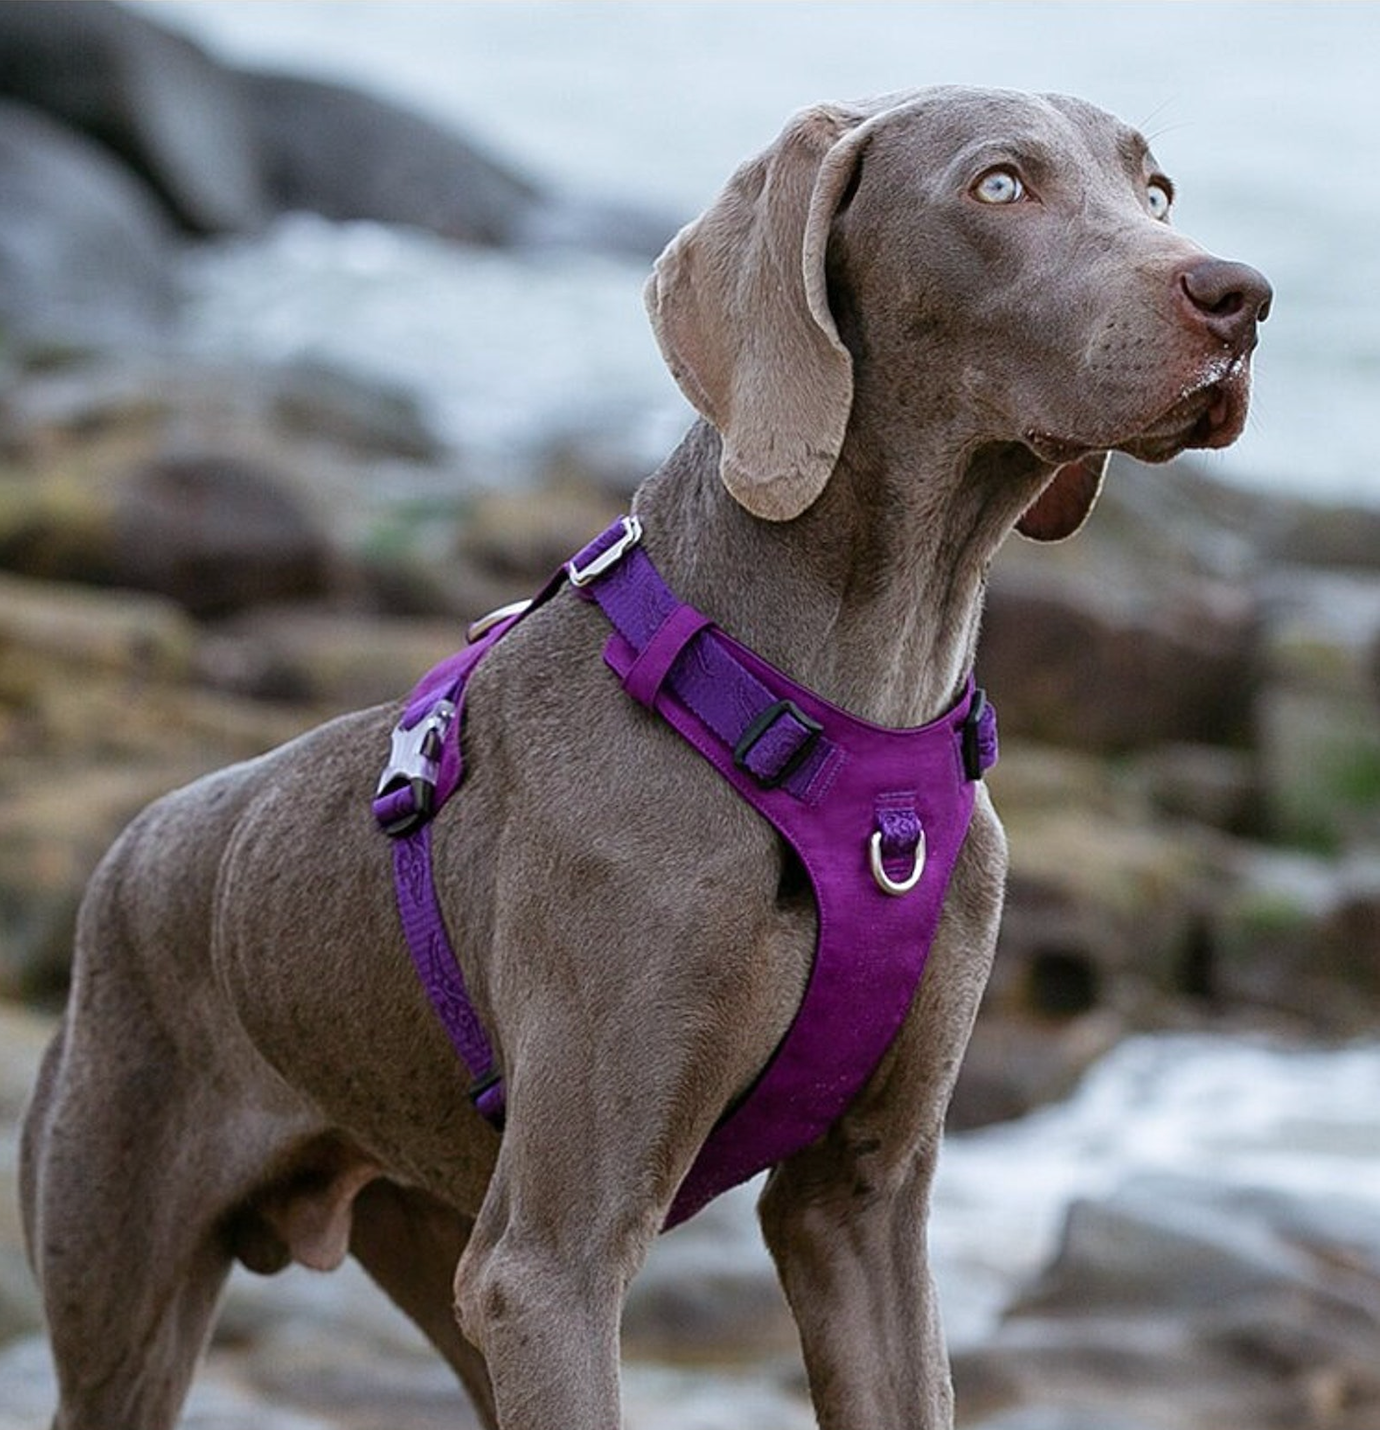 Photo of a dog wearing a harness with a leash attached, standing in a grassy area with trees in the background.